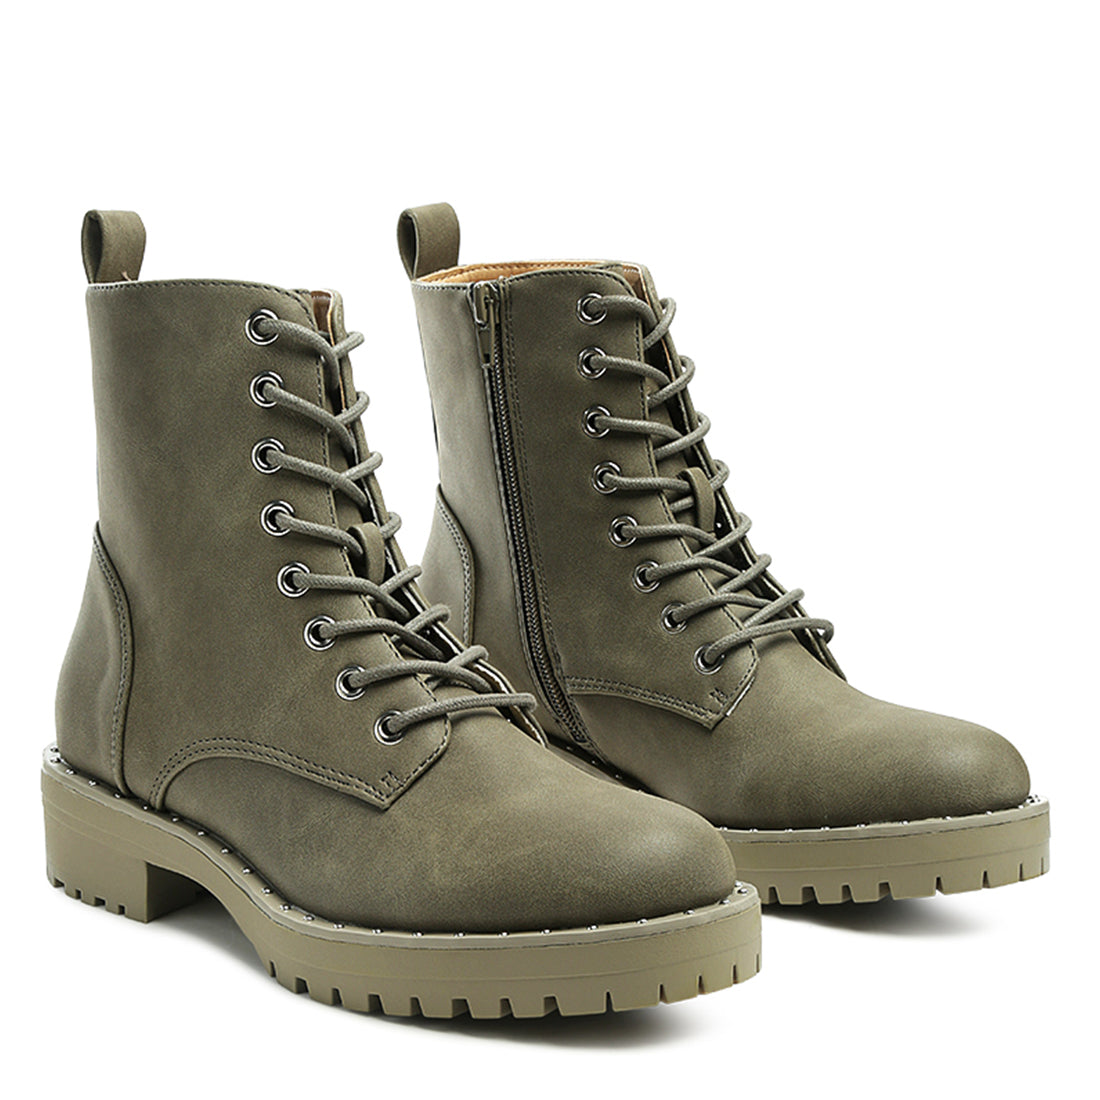 Olive Stud Lined Lace-Up Biker Boots